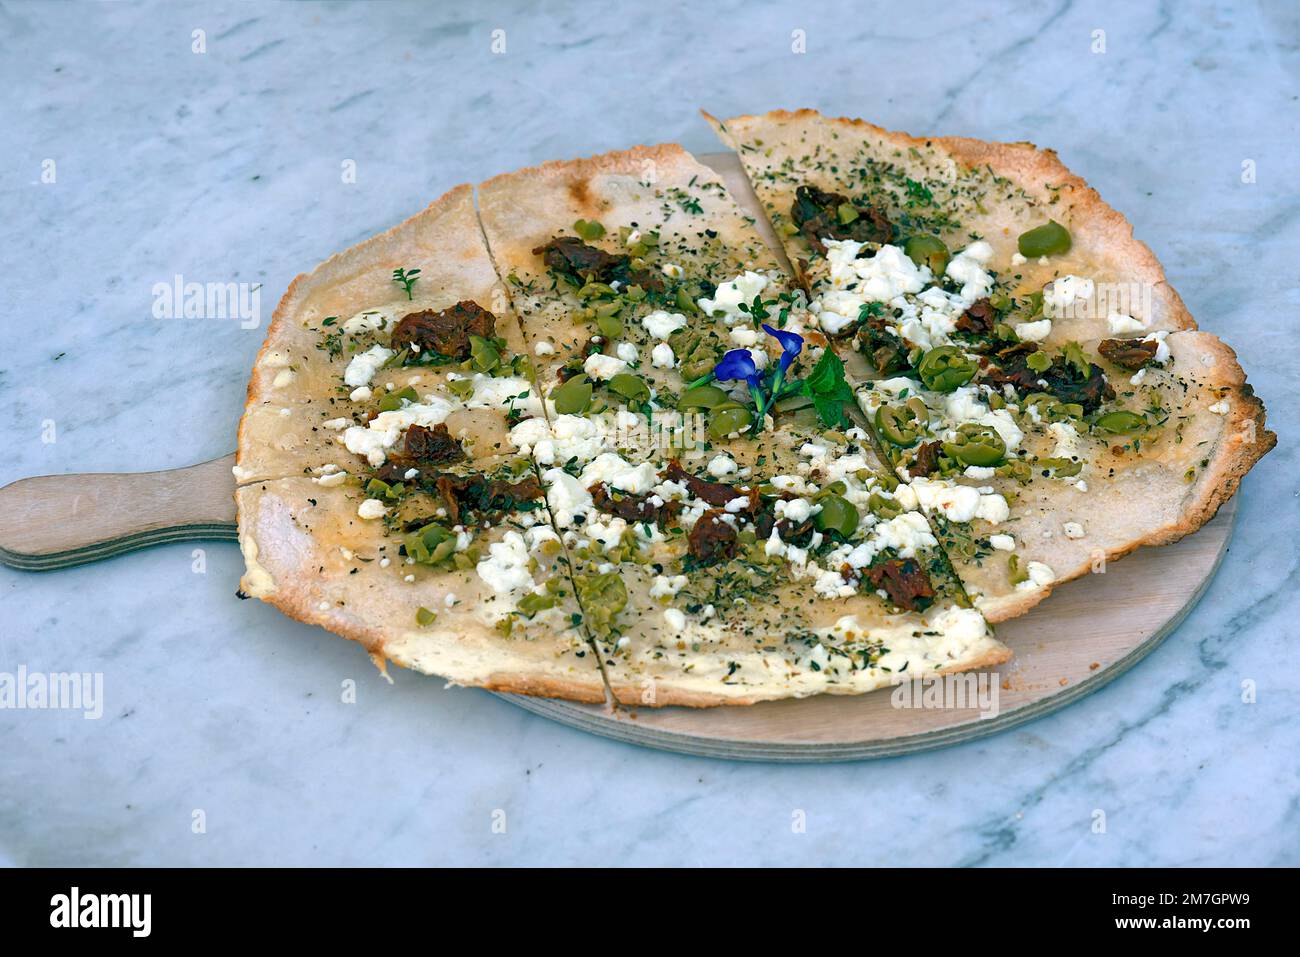 Flammkuchen with olives dried tomatoes and feta cheese on a wooden board, Bavaria, Germany Stock Photo